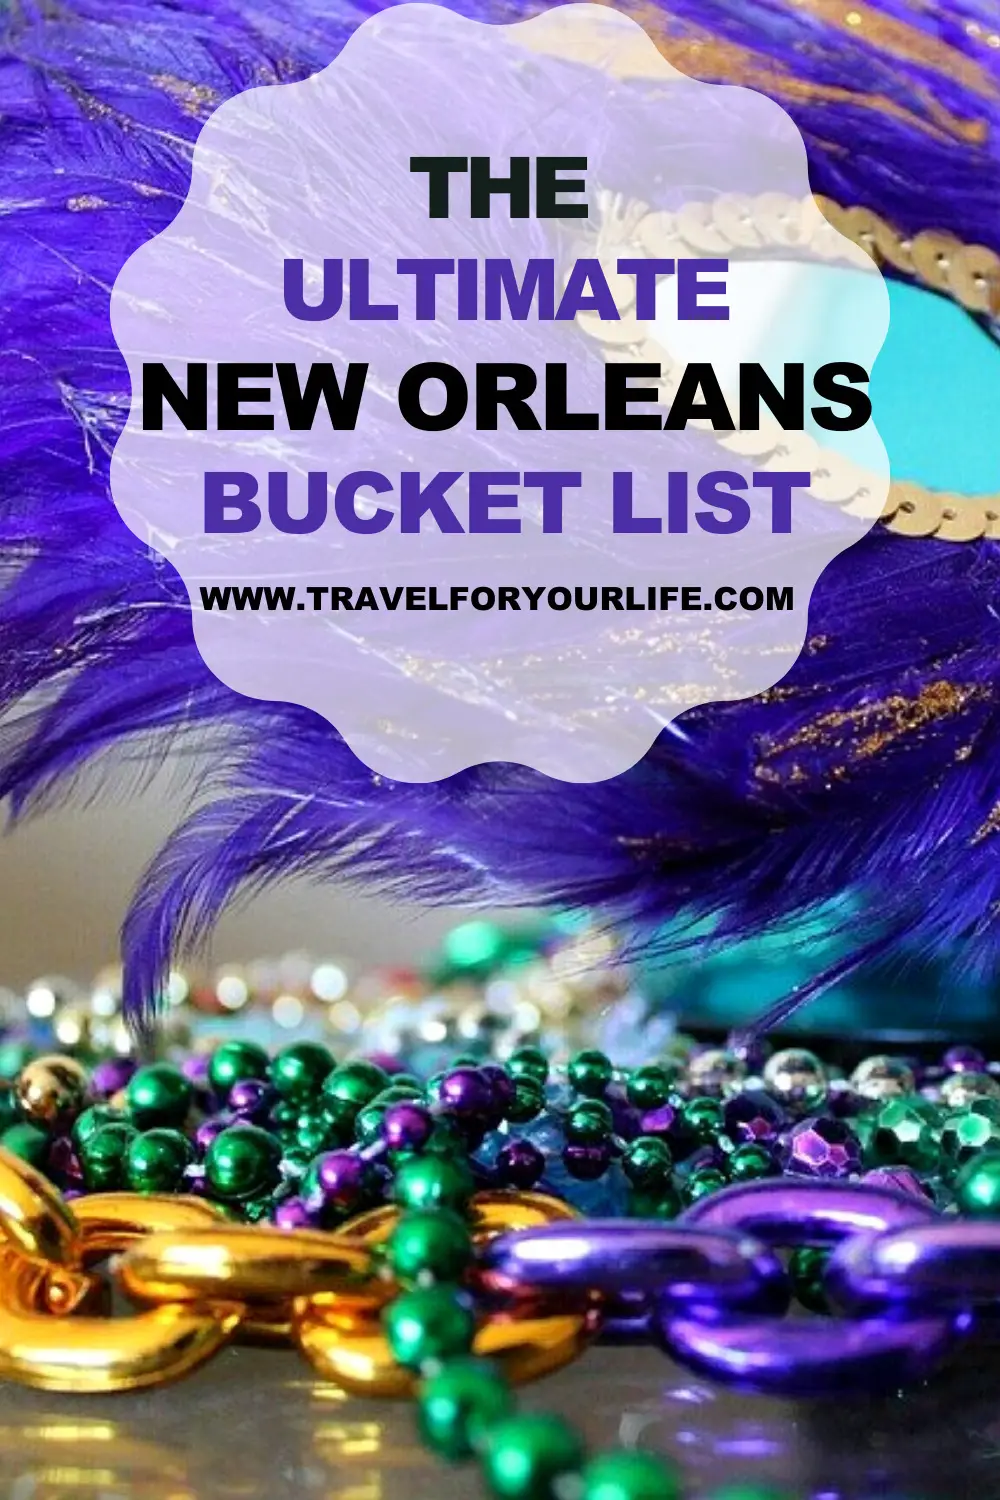 THE ULTIMATE NEW ORLEANS BUCKET LIST